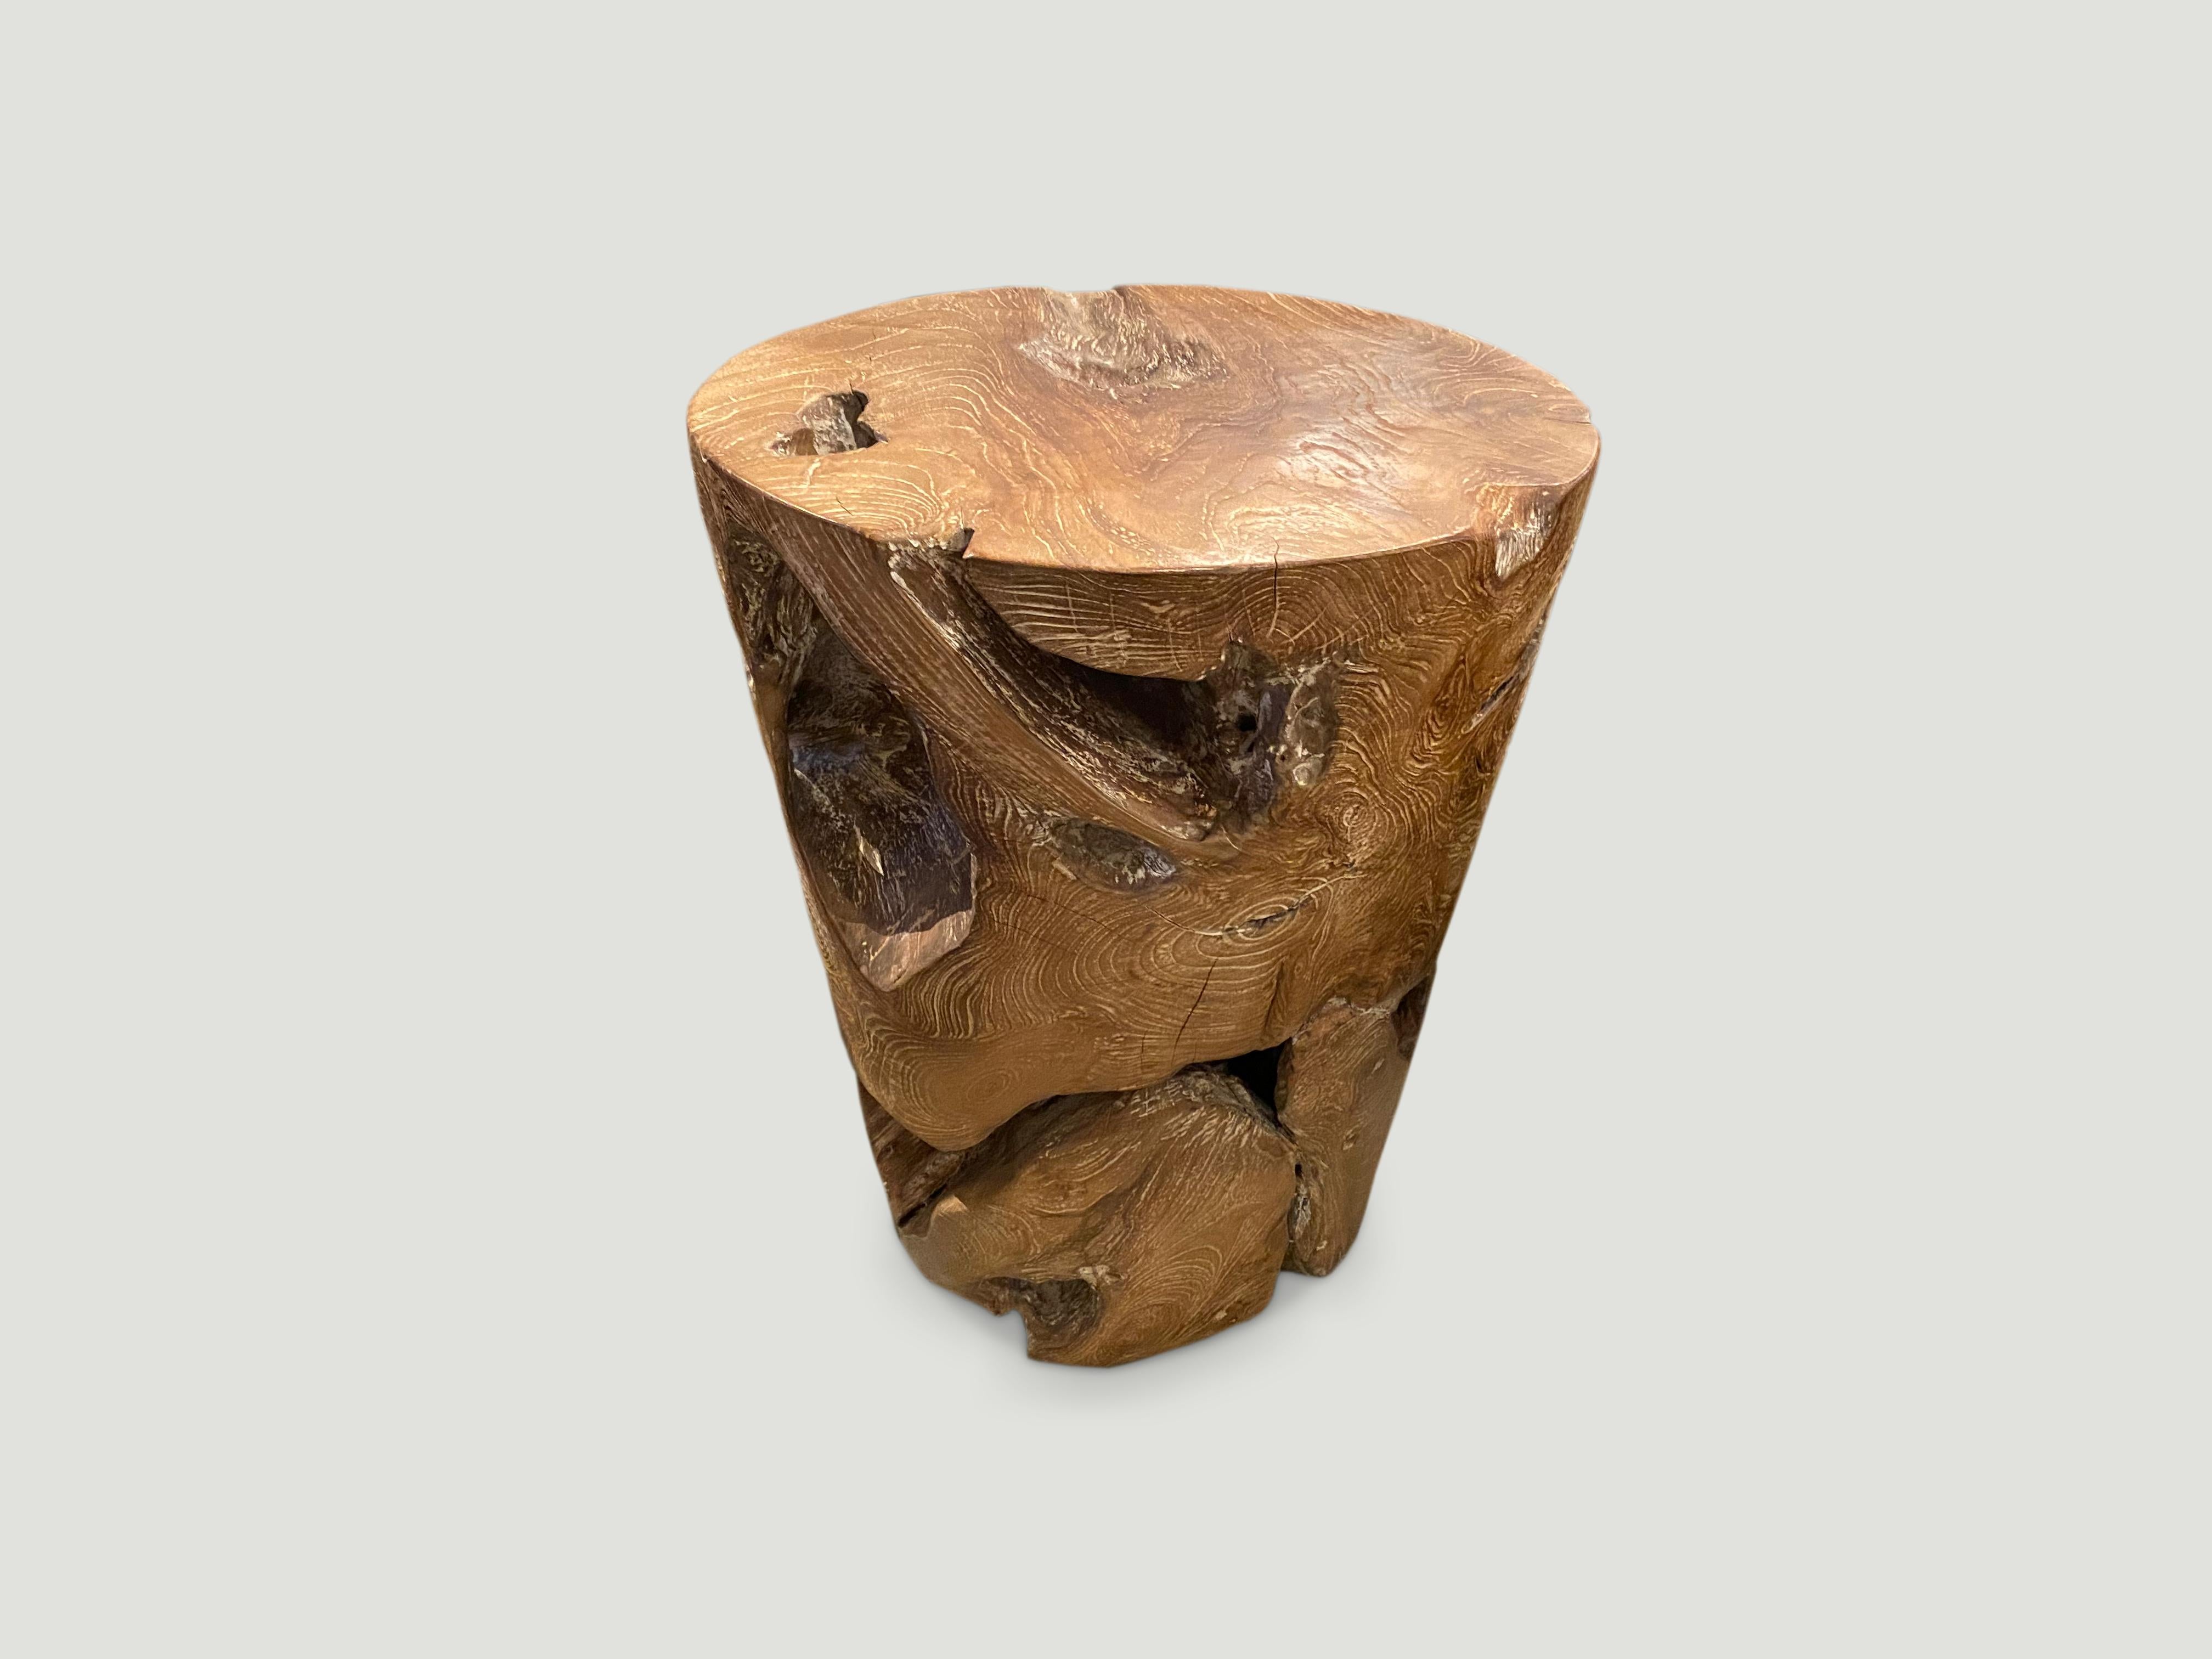 Andrianna Shamaris Organic Cerused Teak Wood Side Table or Pedestal In Excellent Condition For Sale In New York, NY